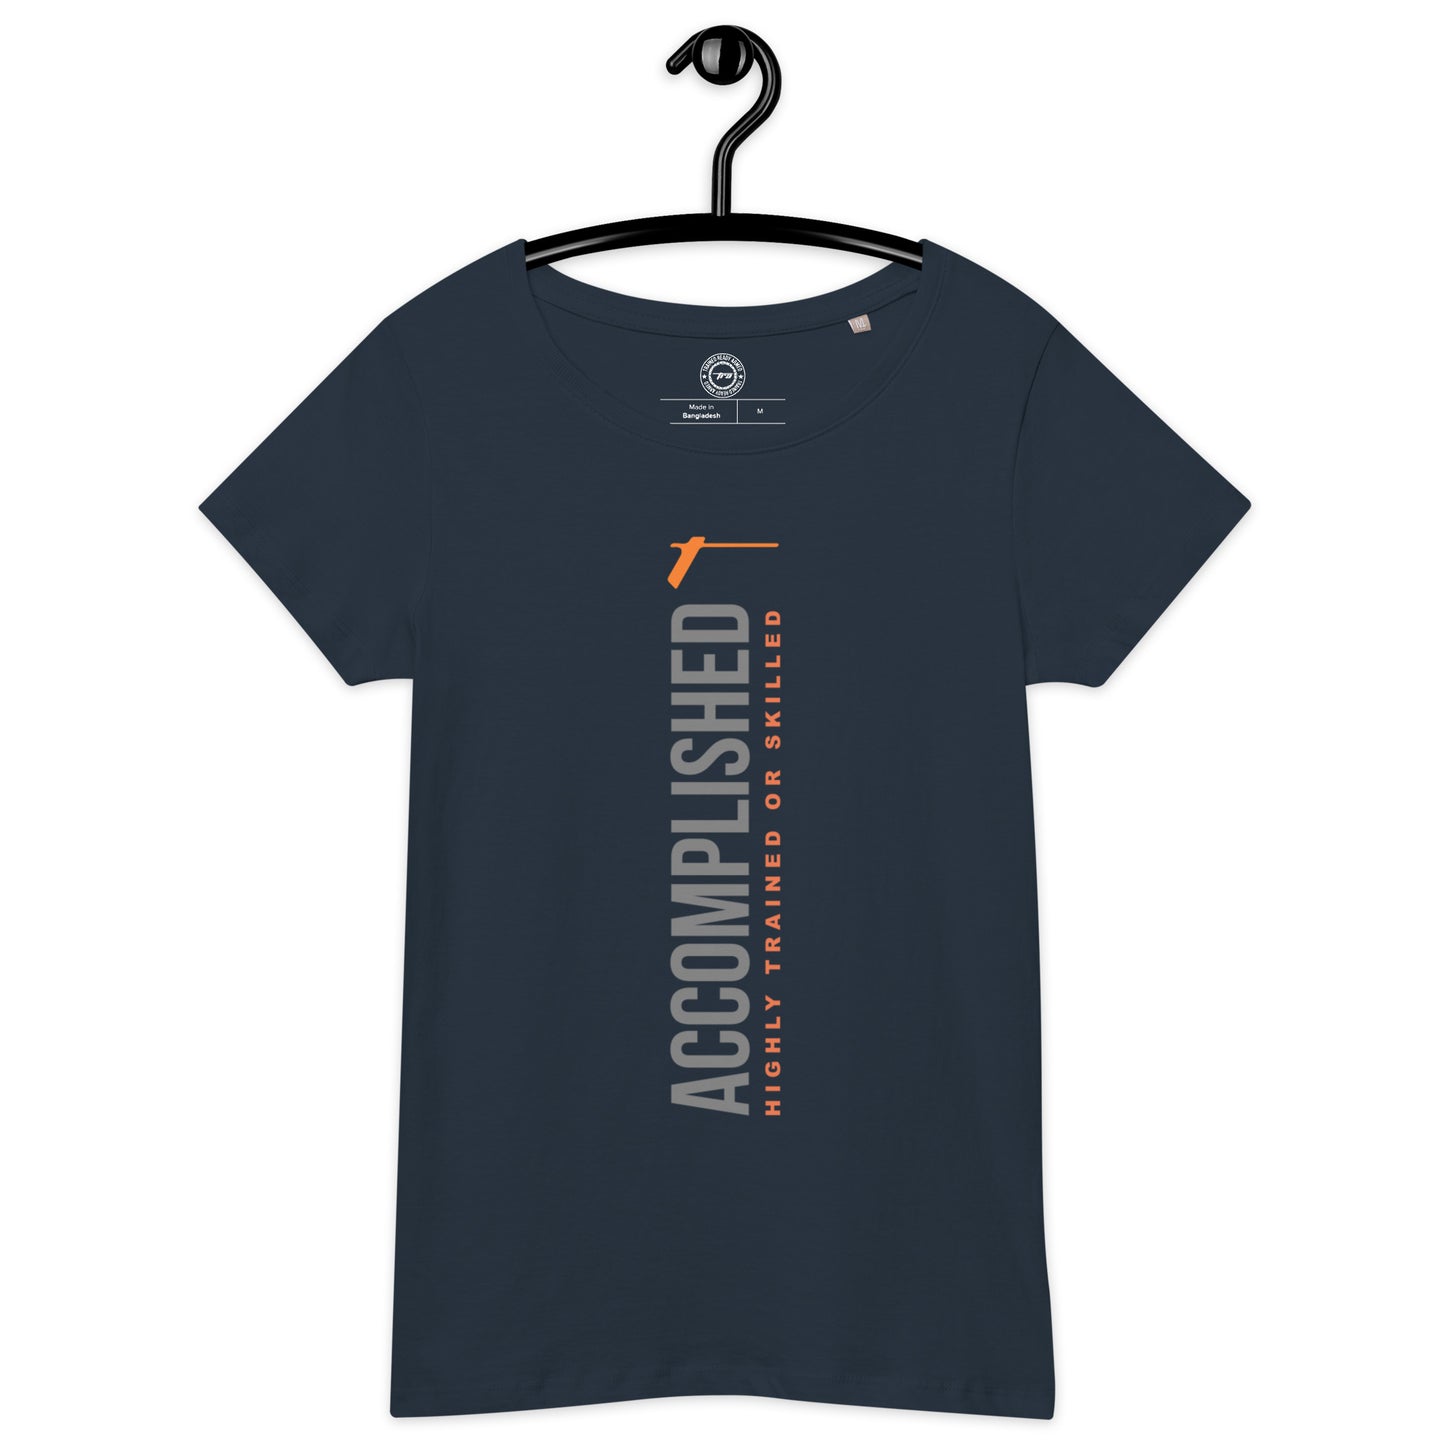 TRA "ACCOMPLISHED" Women’s basic organic t-shirt - Trained Ready Armed Apparel